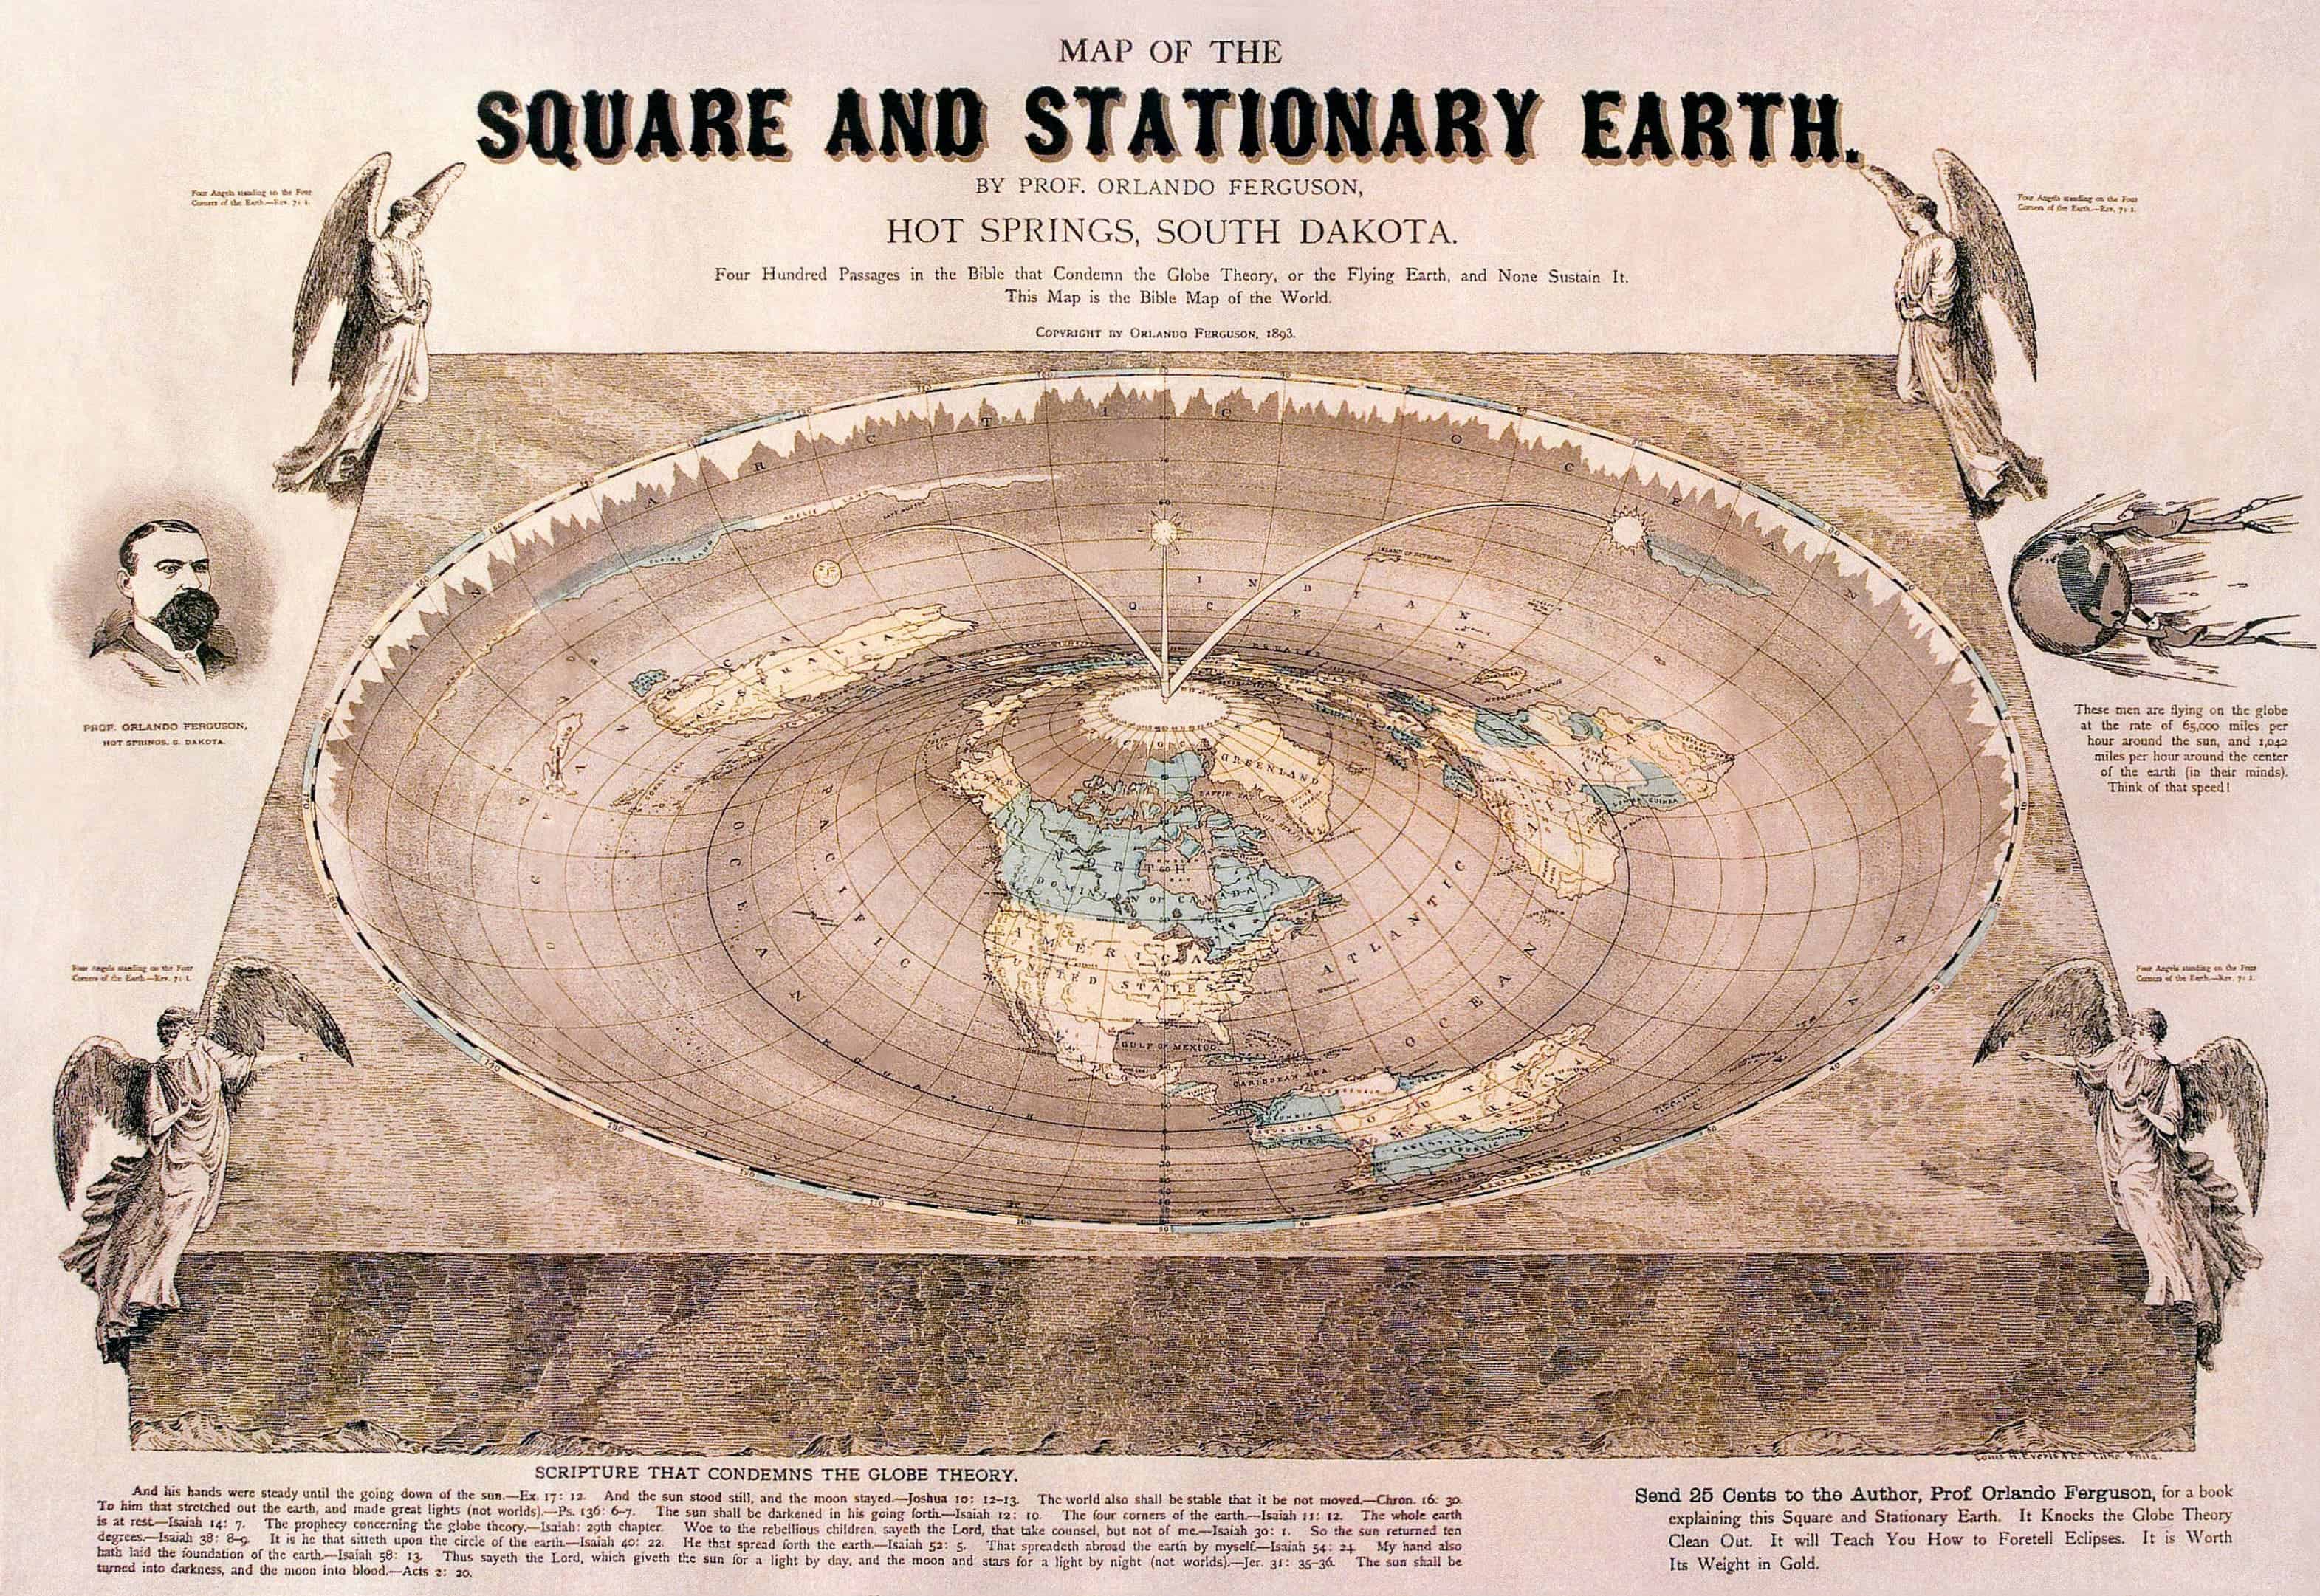 The flat Earth conspiracy theory has gained surprising popularity on social media.